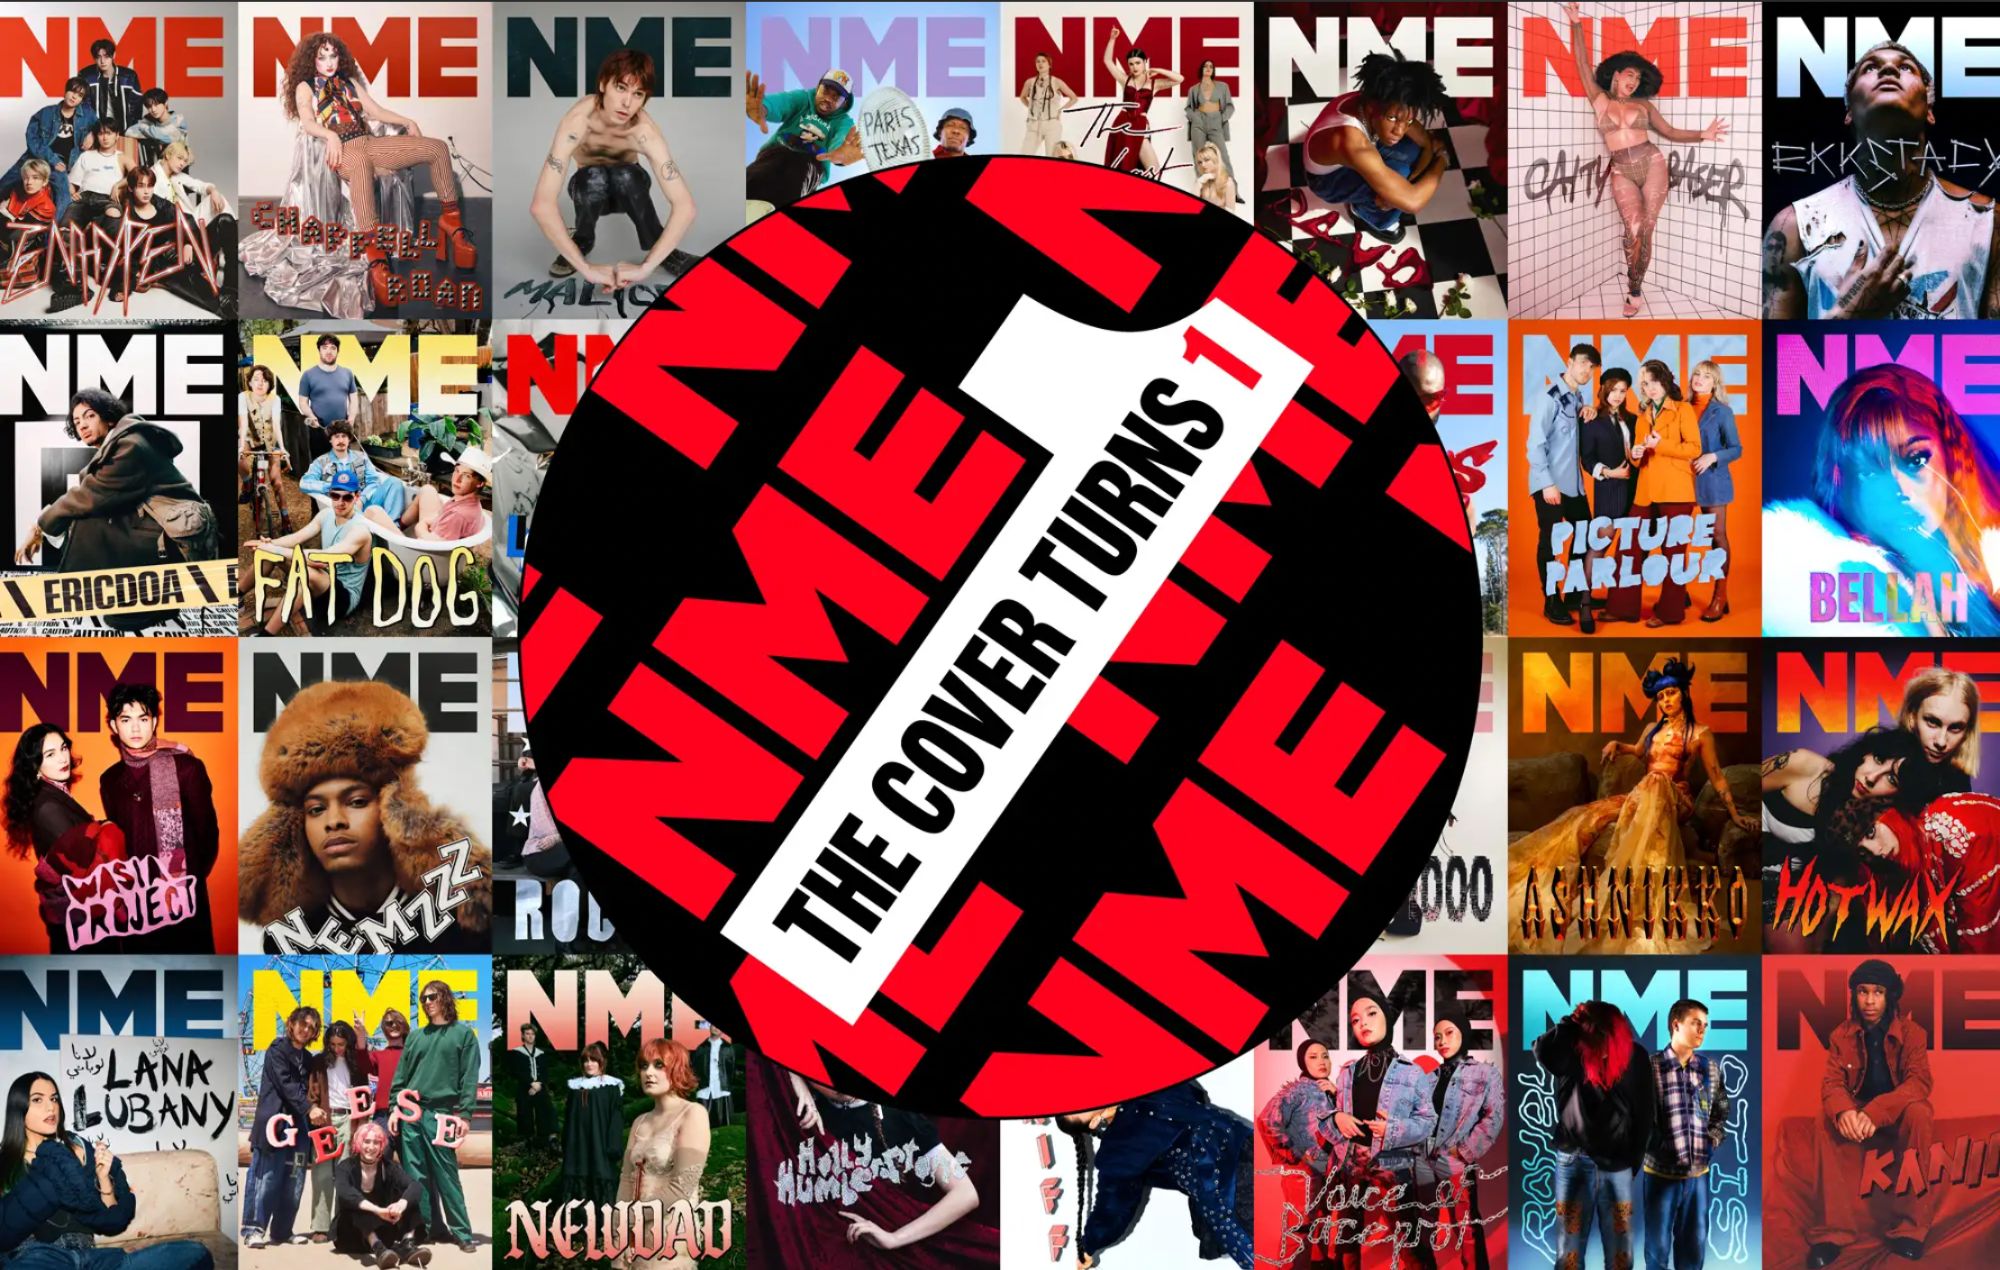 The Cover Turns 1: NME marks one year of championing emerging talent with parties in London and Singapore